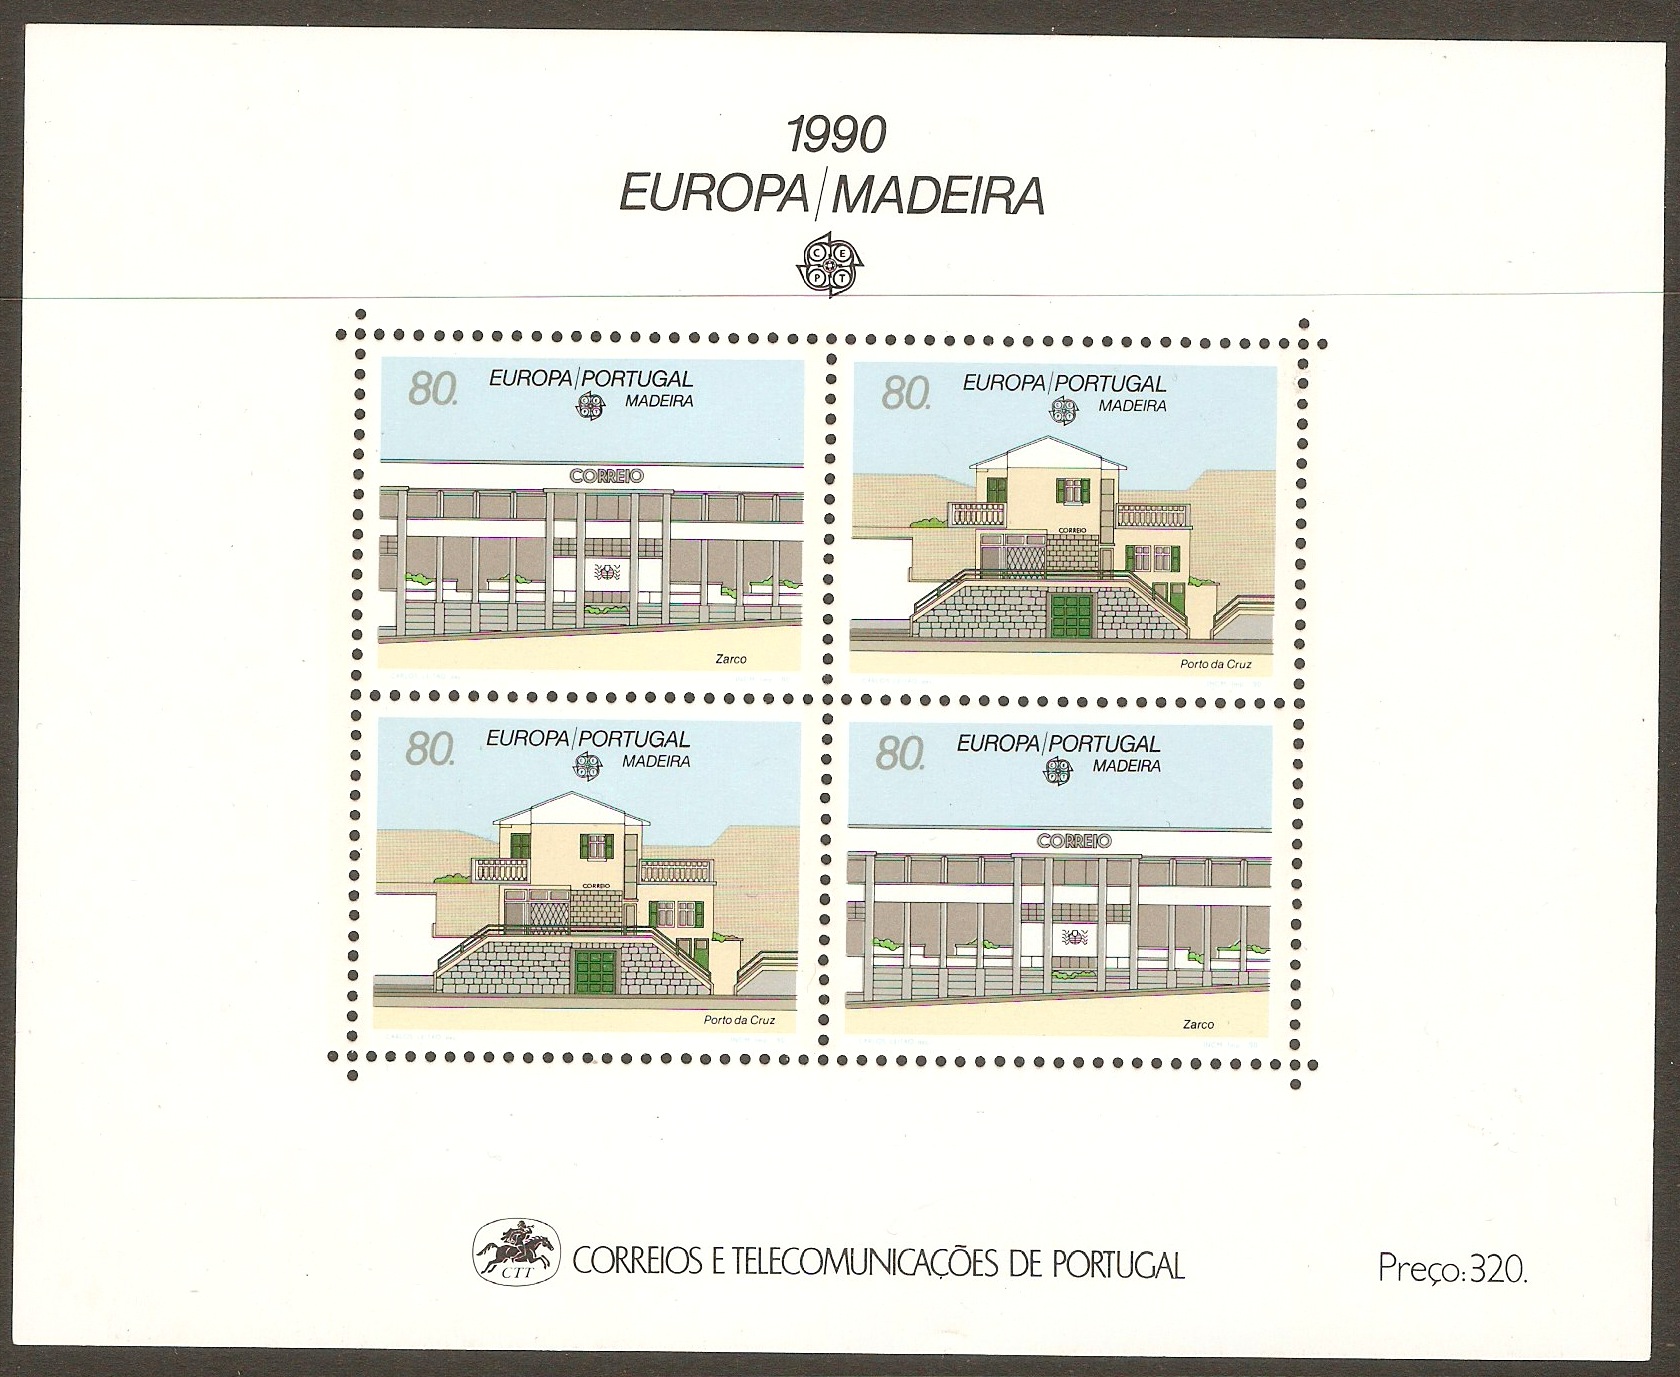 Madeira 1990 Europa Post Offices sheet. SGMS255.